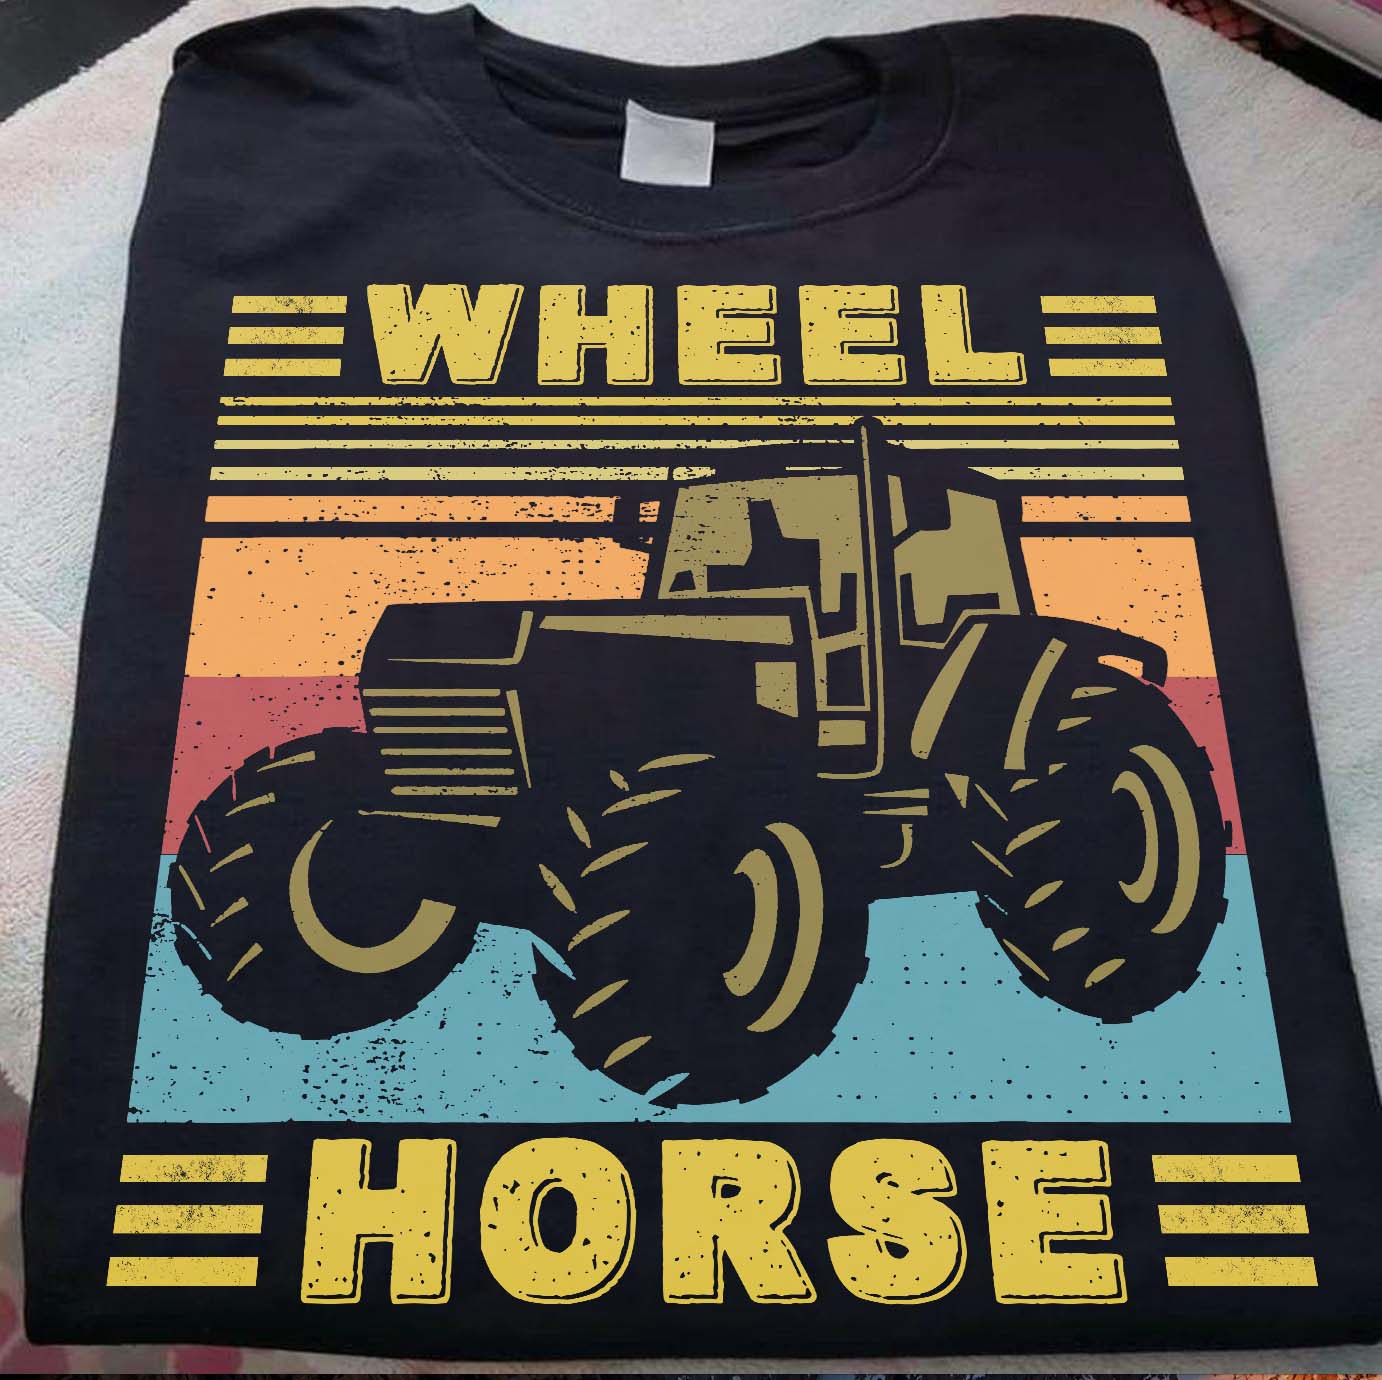 Wheel horse - Tractor driver